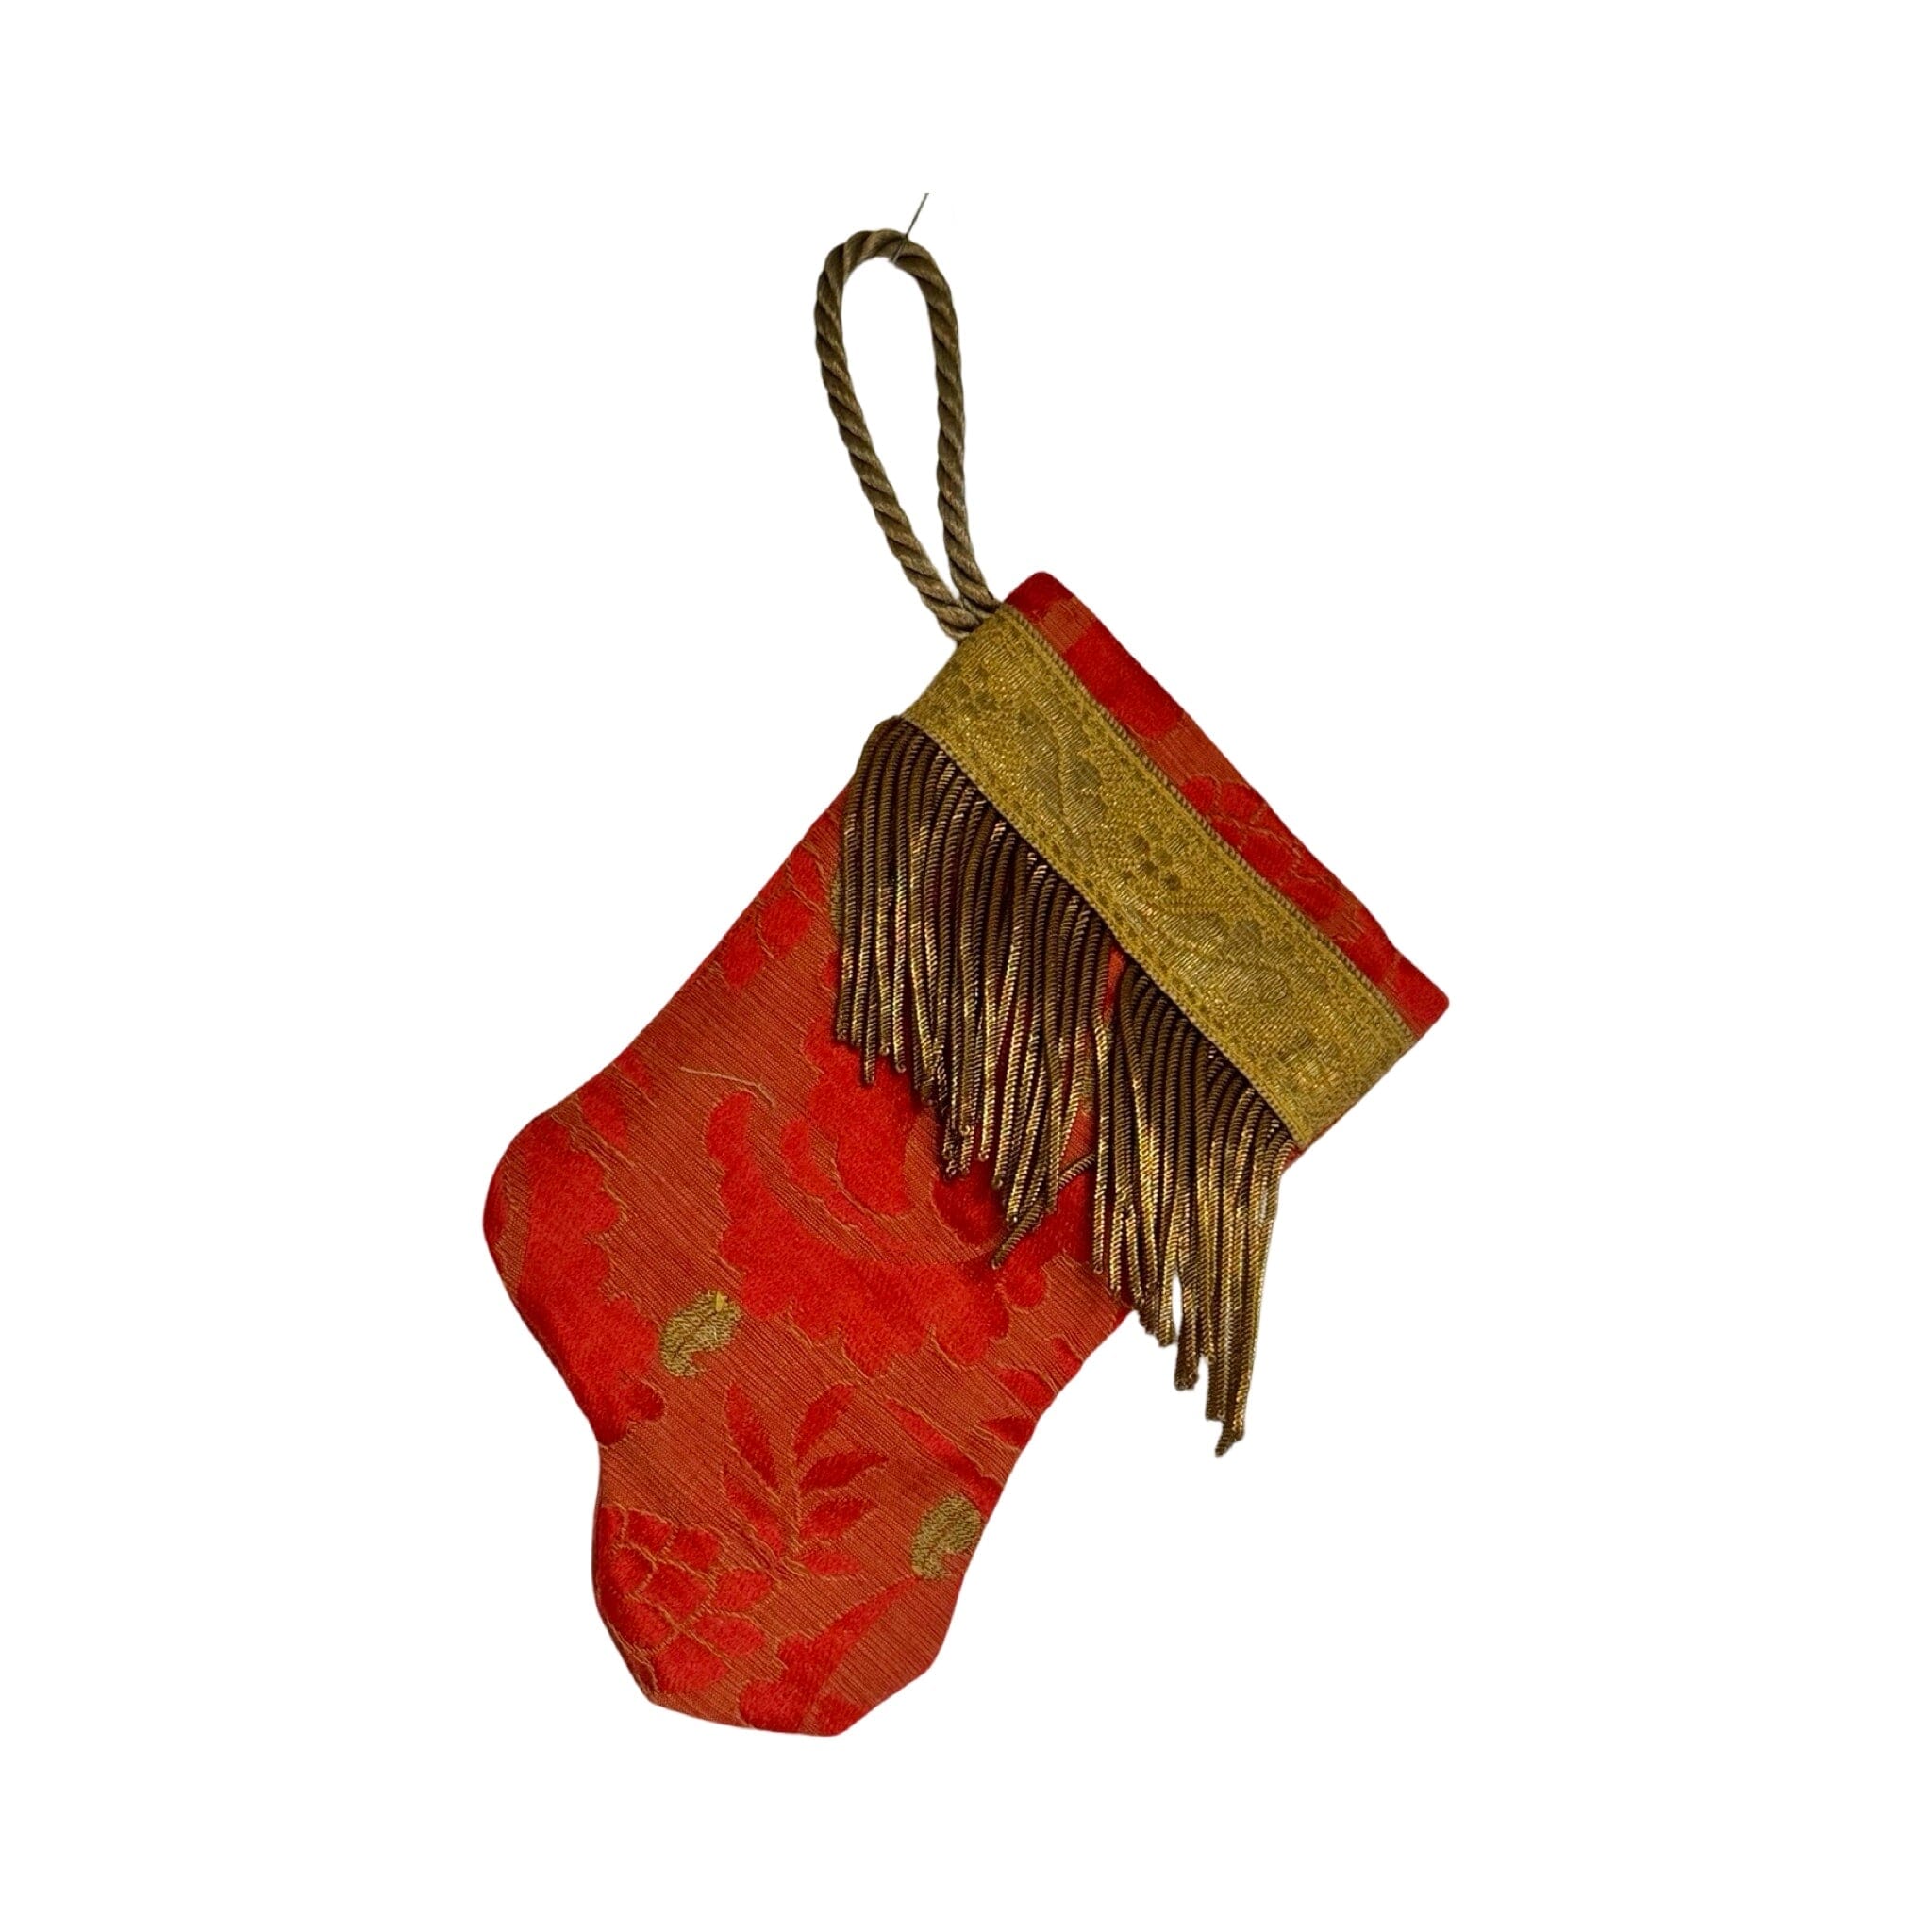 Handmade Mini Stocking Made From Vintage Fabric and Trims- Red and Gold Ornament B. Viz Design G 